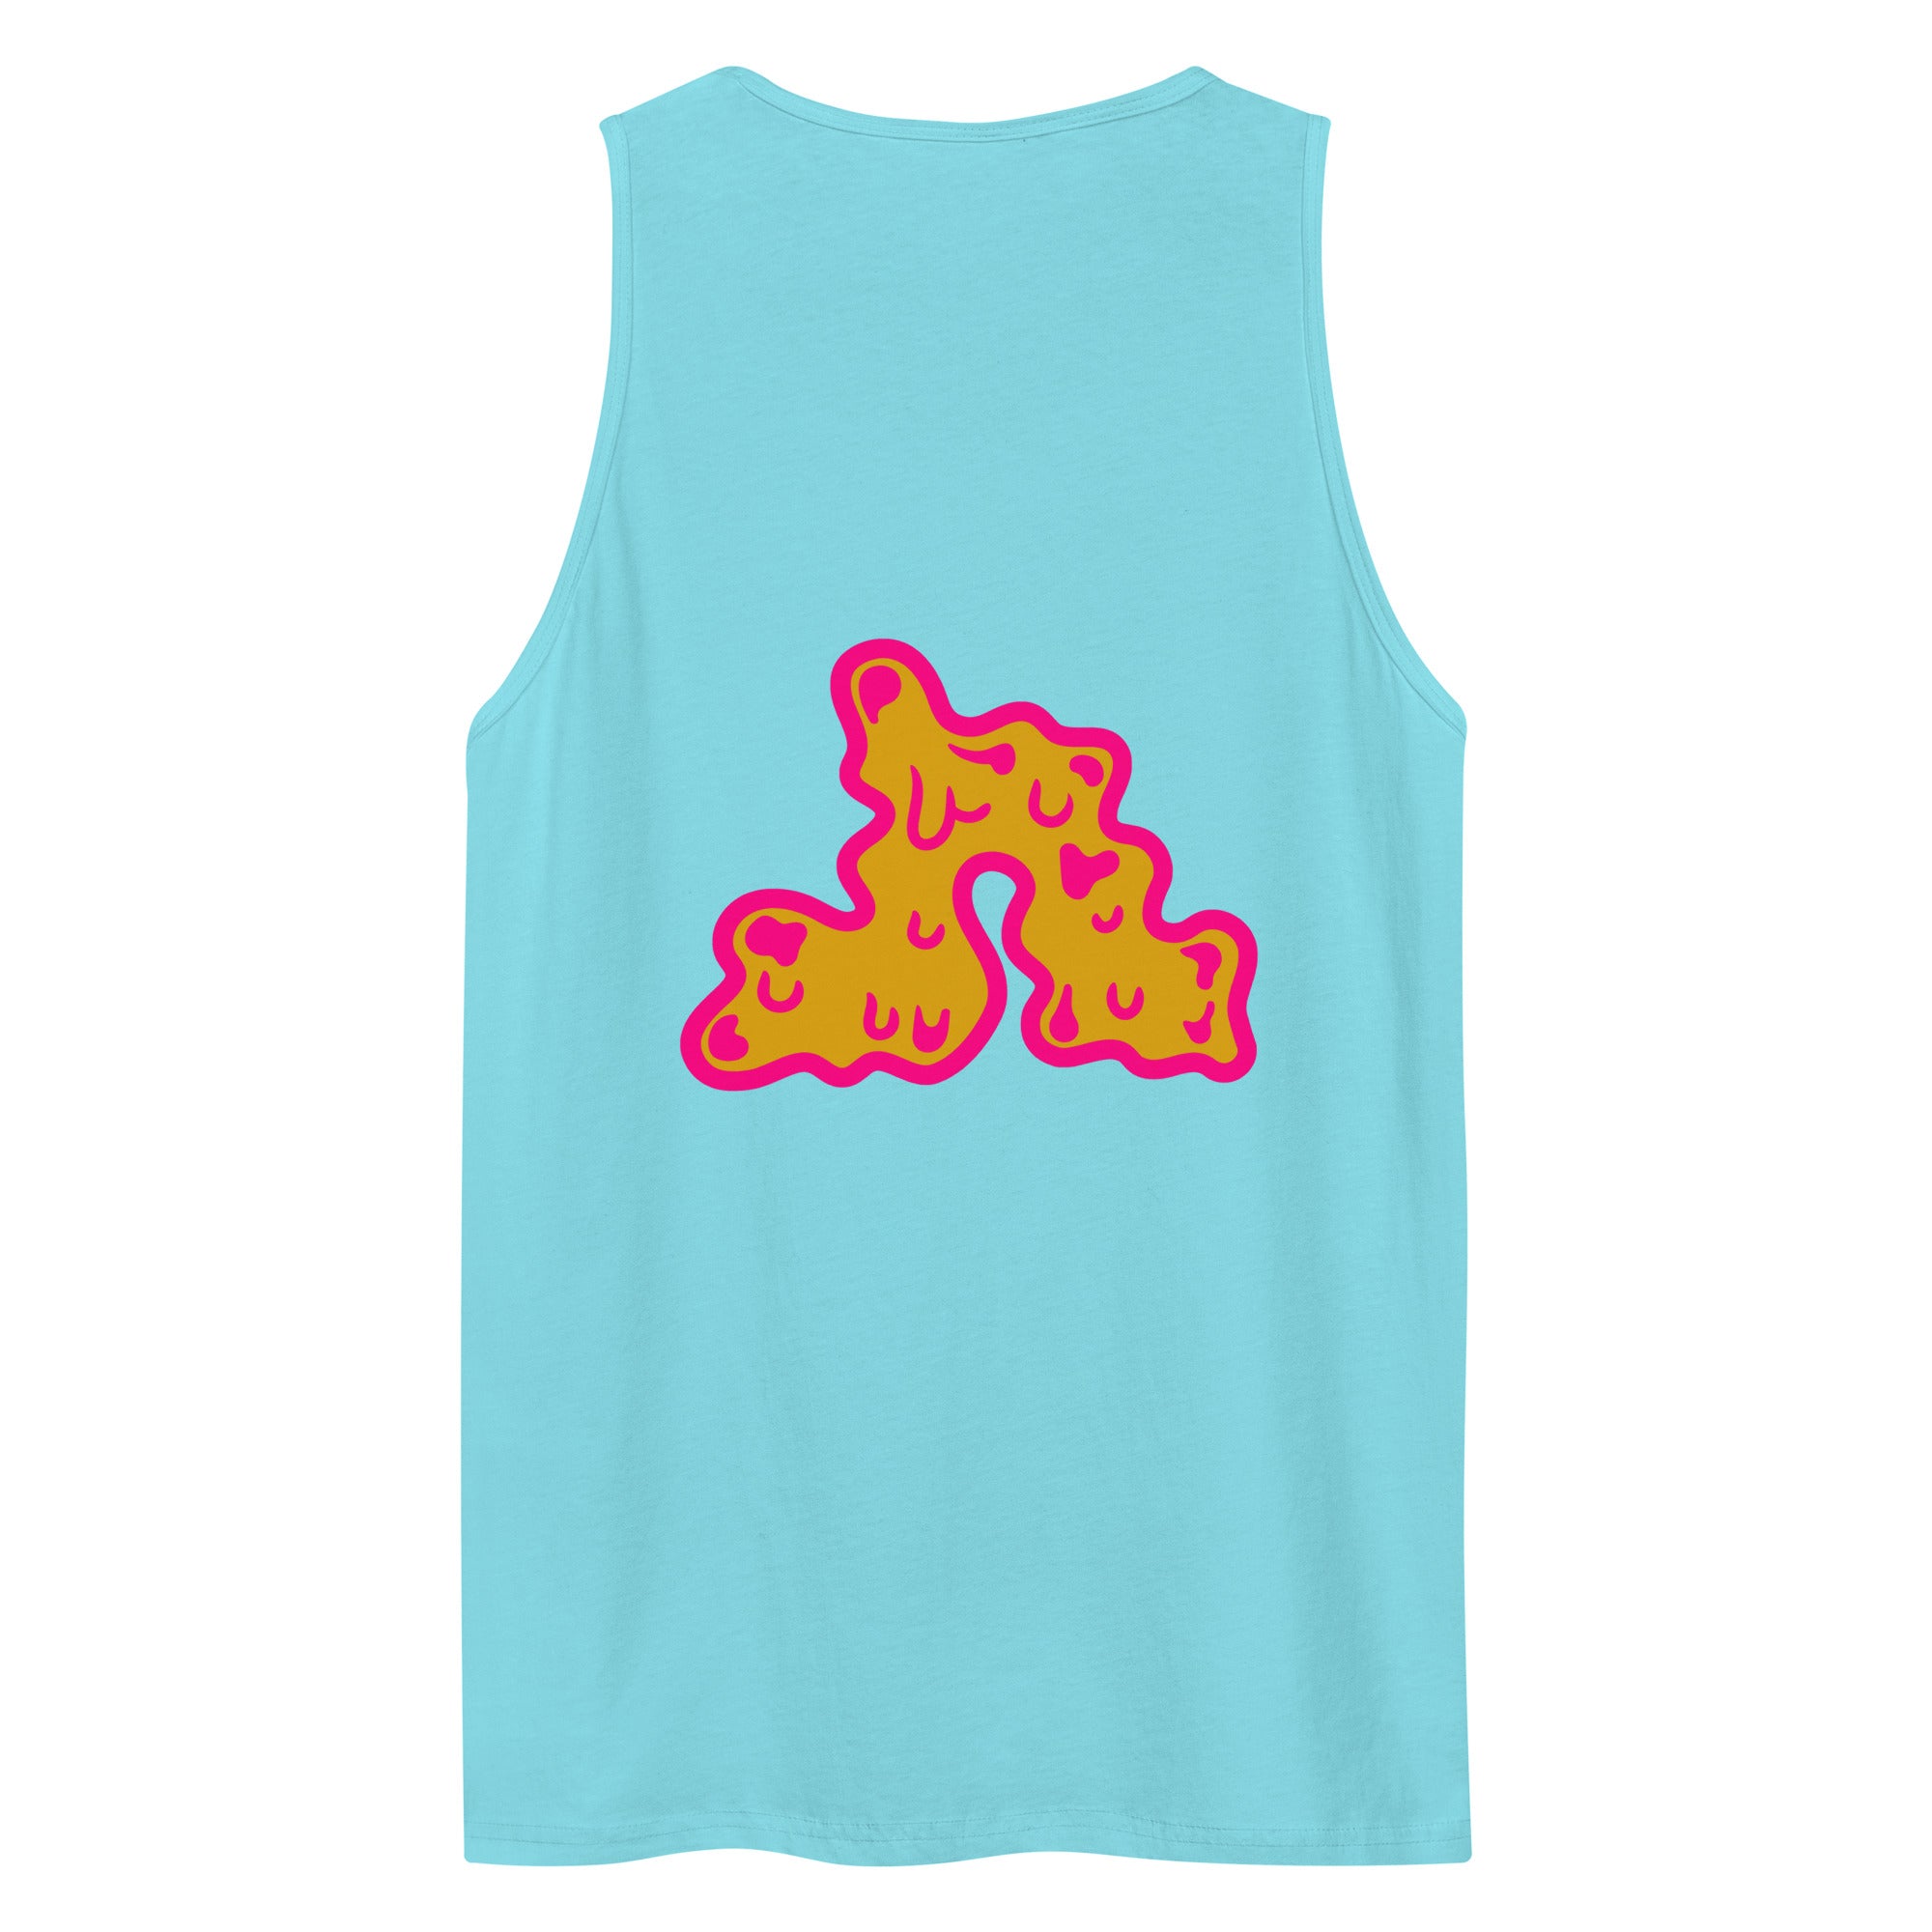 PURE Solo tank top pacific blue, pink poison, goldenrod.